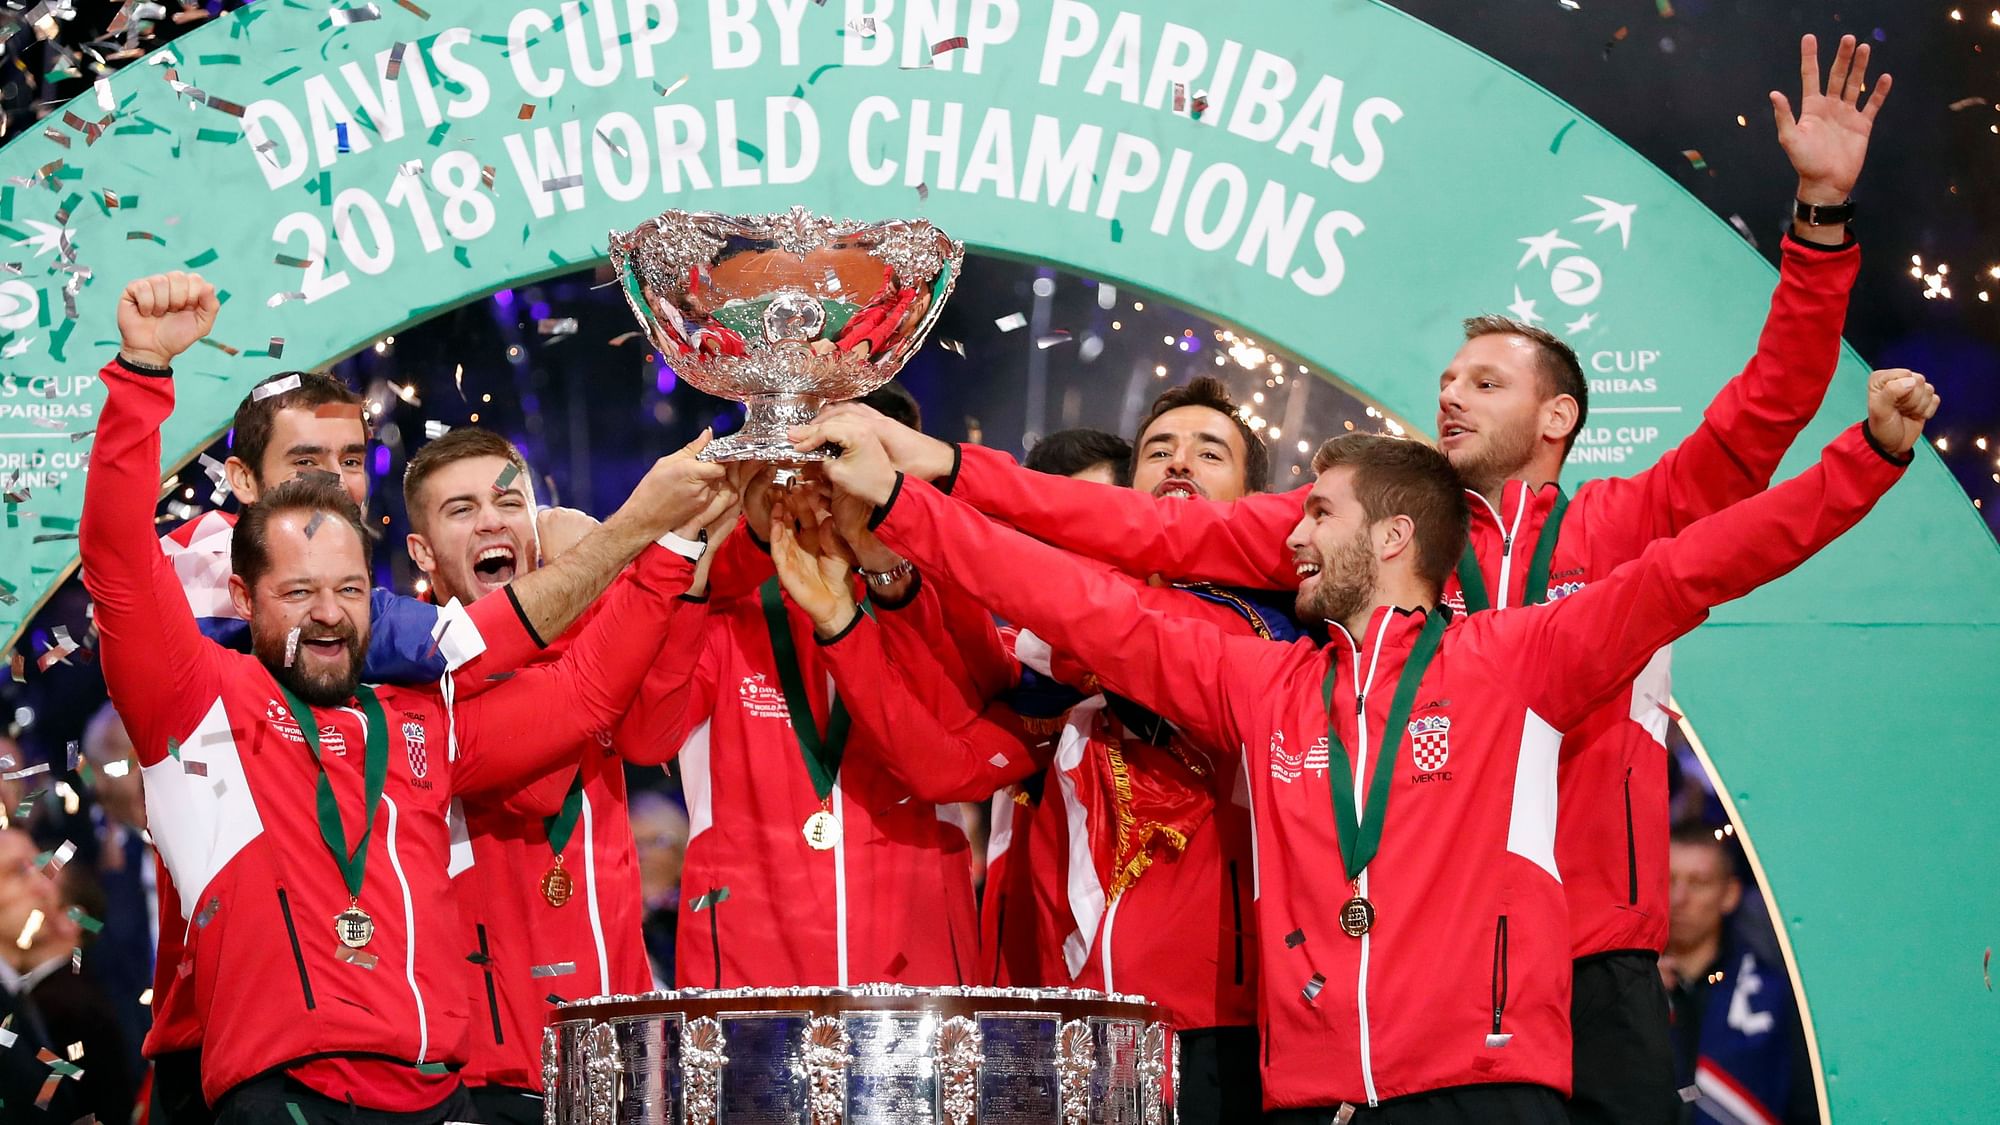 Croatia’s team captain Zeljko Krajan (left) and players lift up the cup after the team won the Davis Cup final between France and Croatia in 2018.